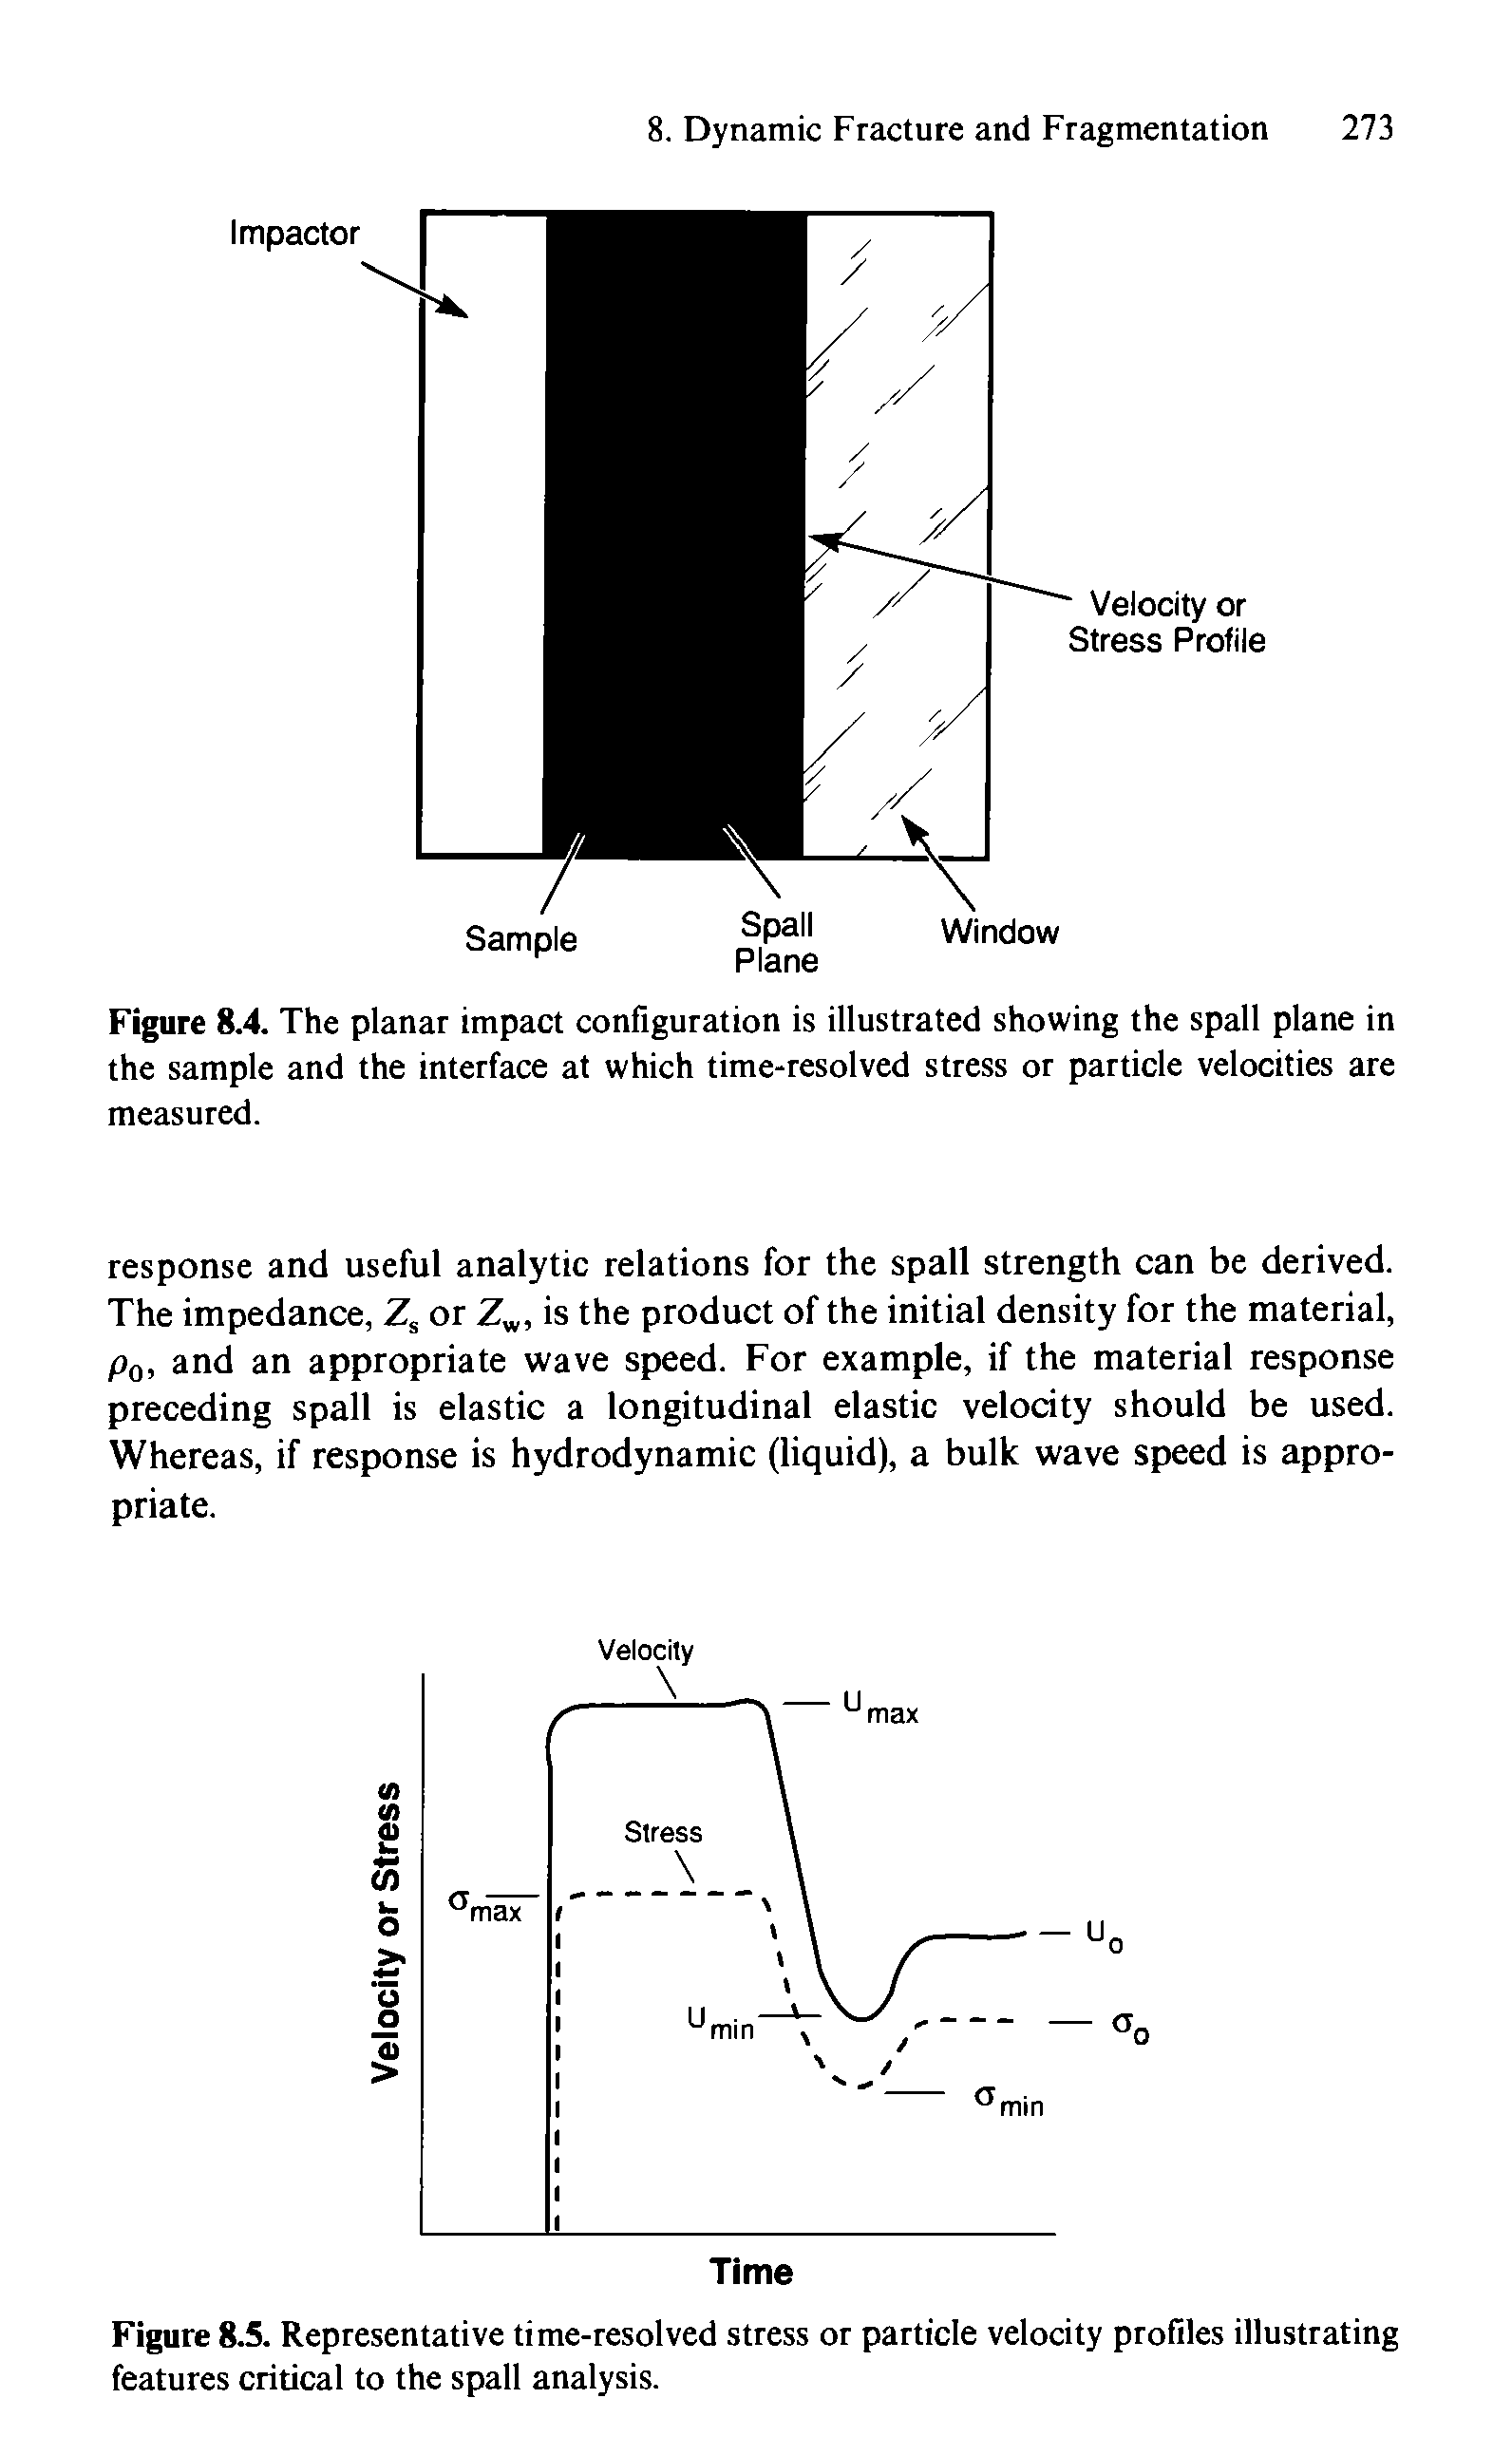 Figure 8.5. Representative time-resolved stress or particle velocity profiles illustrating features critical to the spall analysis.